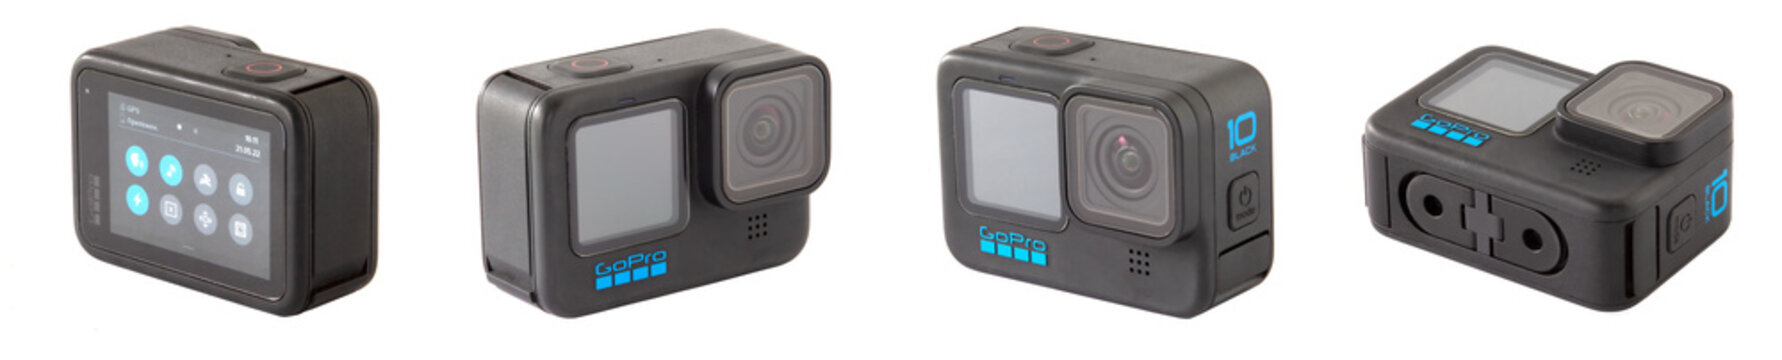 GoPro Hero 10. The Ultimate Action Camera for Sports and Adventure Photography.  Set of 4 Isolated Photos on White Background from Different Angles.